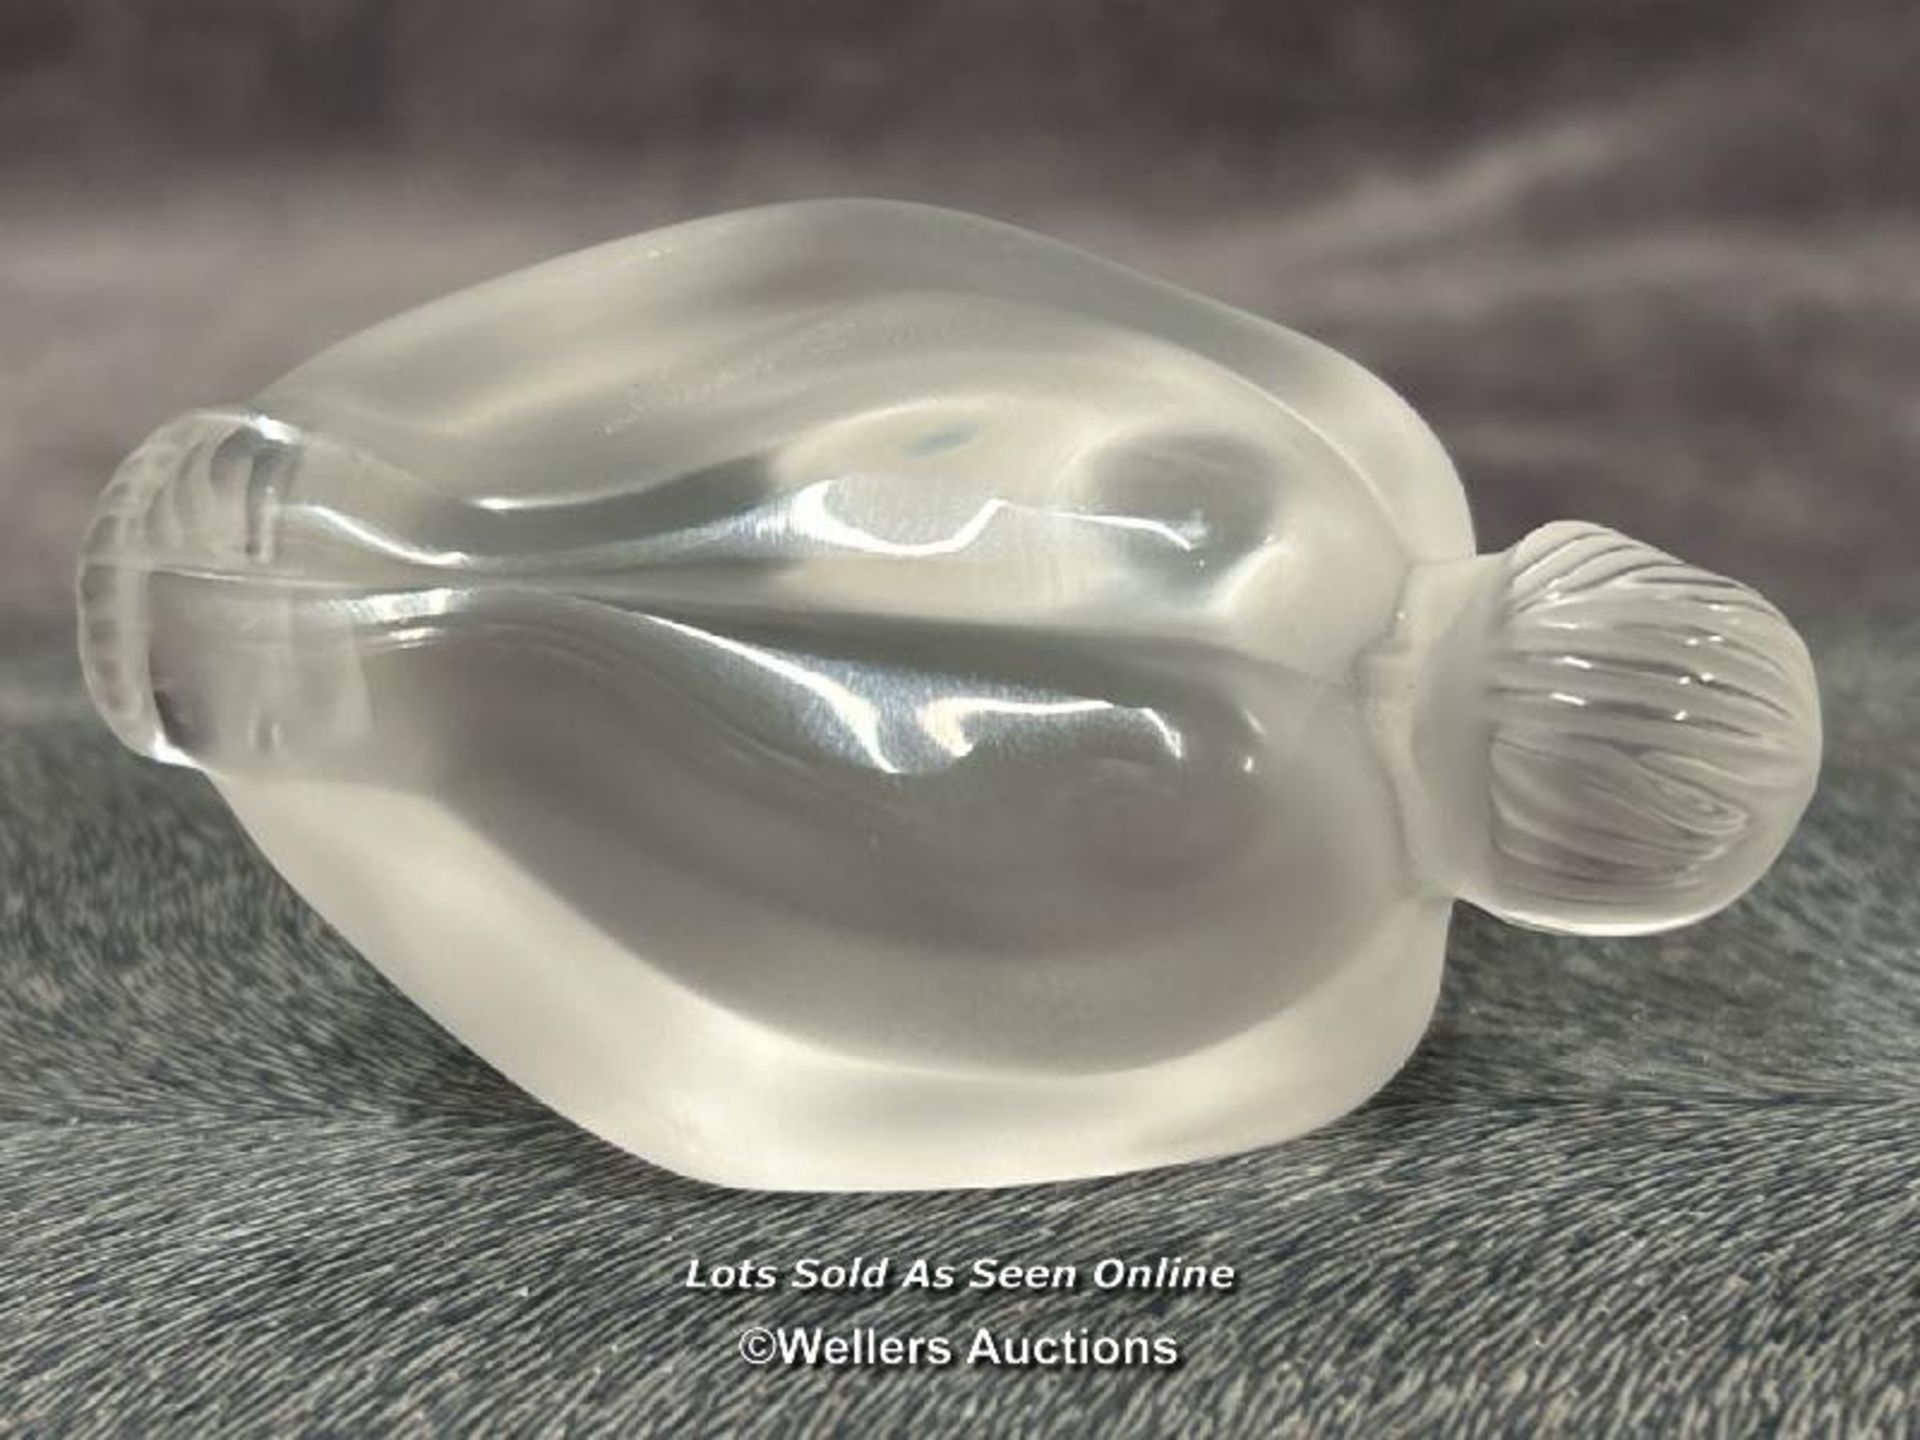 Lalique frosted crystal figurine 'Feuille Pliee', 4cm high, signed / AN2 - Image 3 of 4